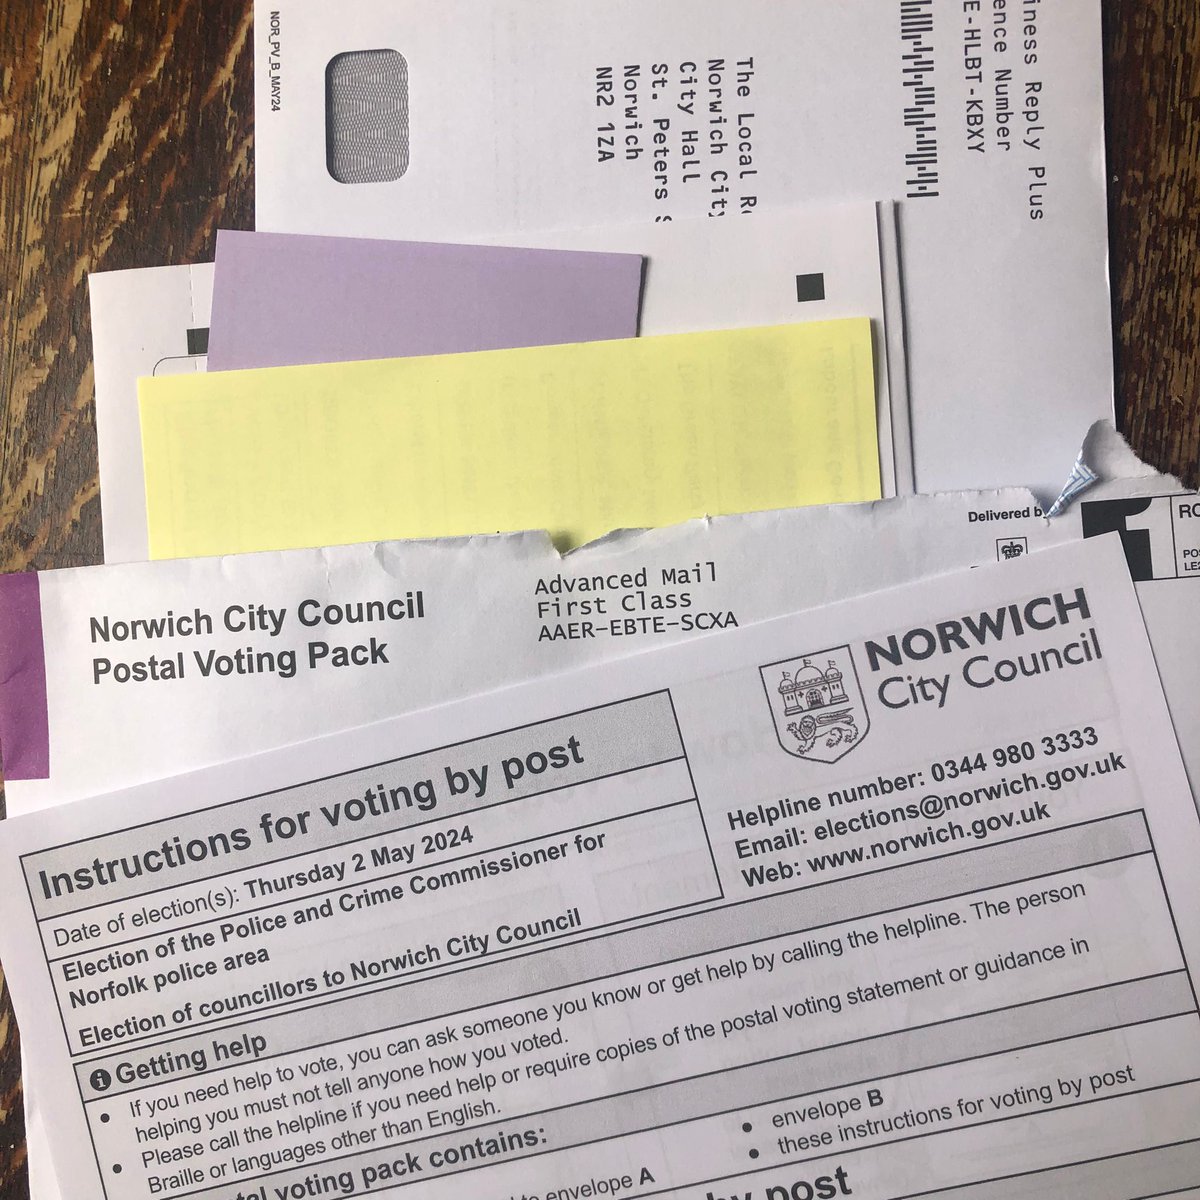 ✉️ Postal voters! Don’t forget you have TWO ballot papers in your packs to return this year. One is for election of your ward councillor to Norwich City Council ✅ and one is for election of the Police and Crime Commissioner for Norfolk ✅. And you can vote Green for both! 🗳️